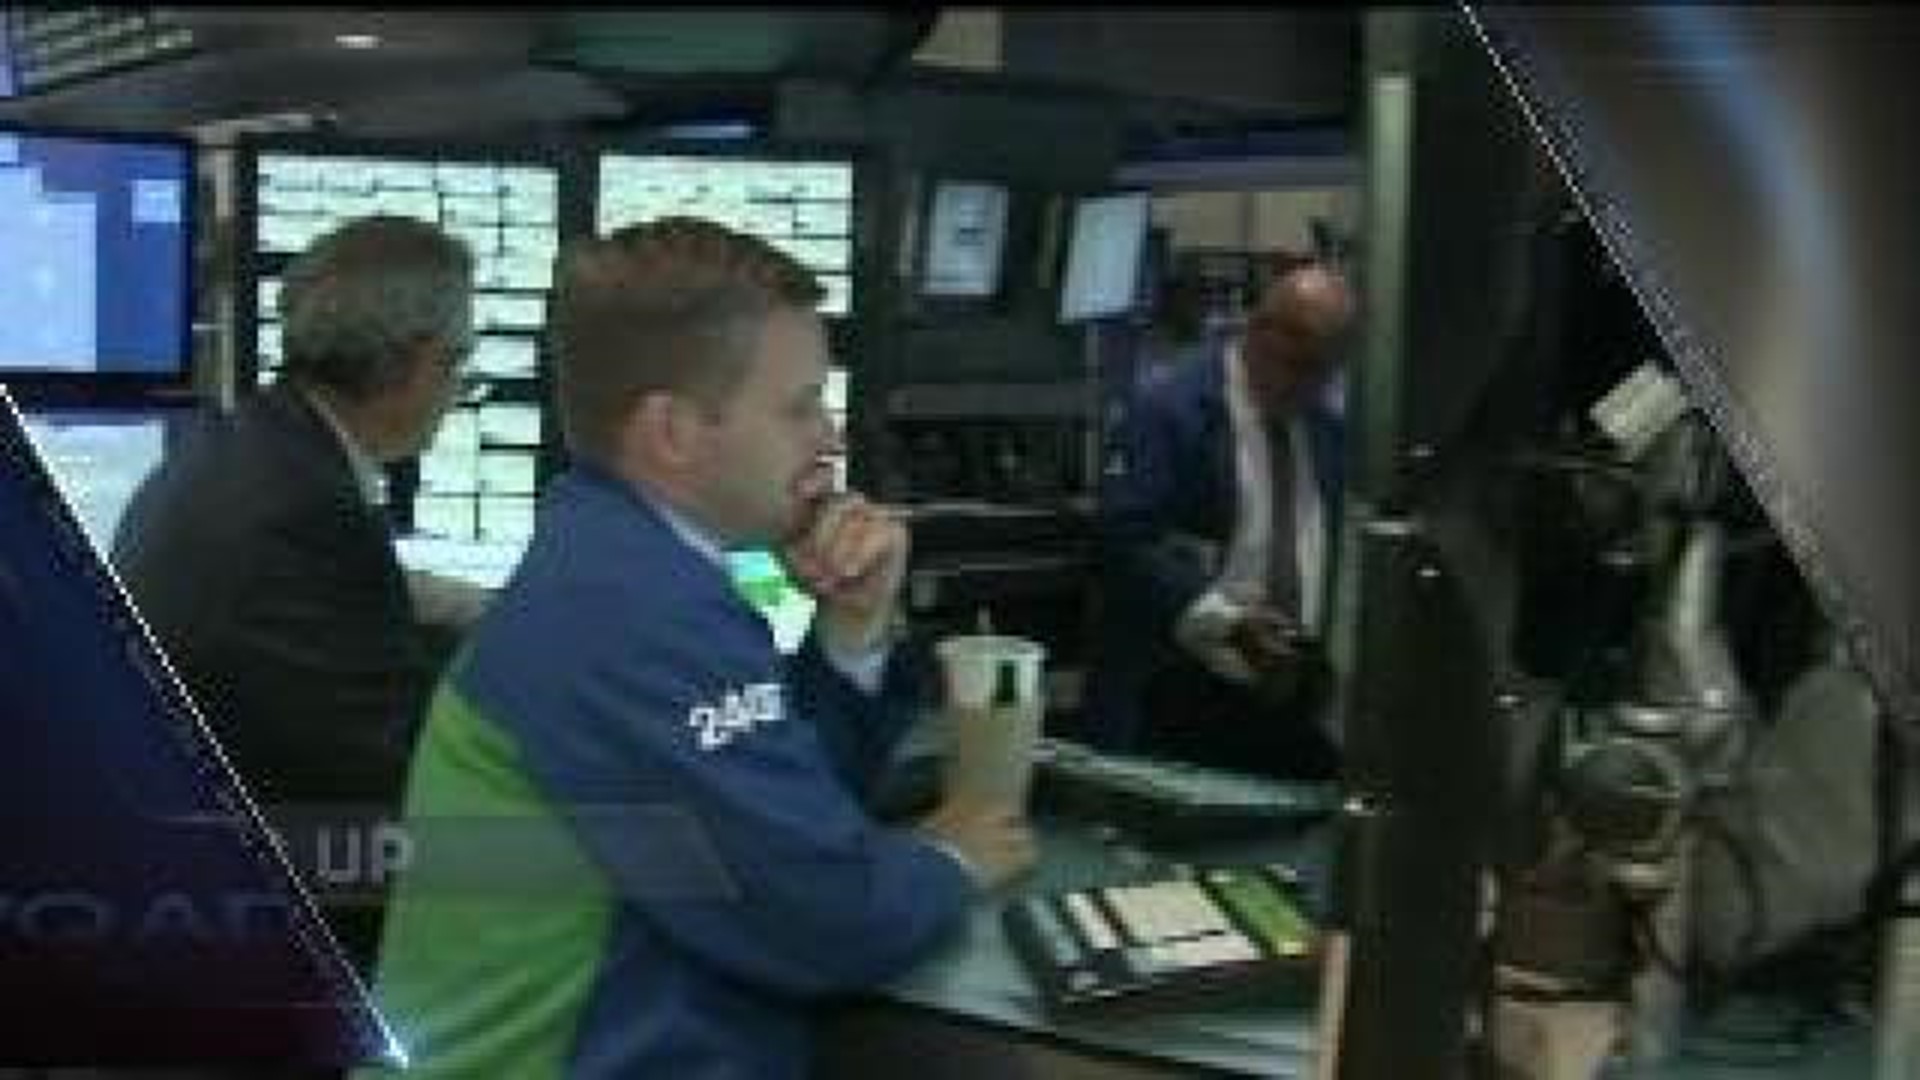 Kassewitz: Markets Moving on From Elections